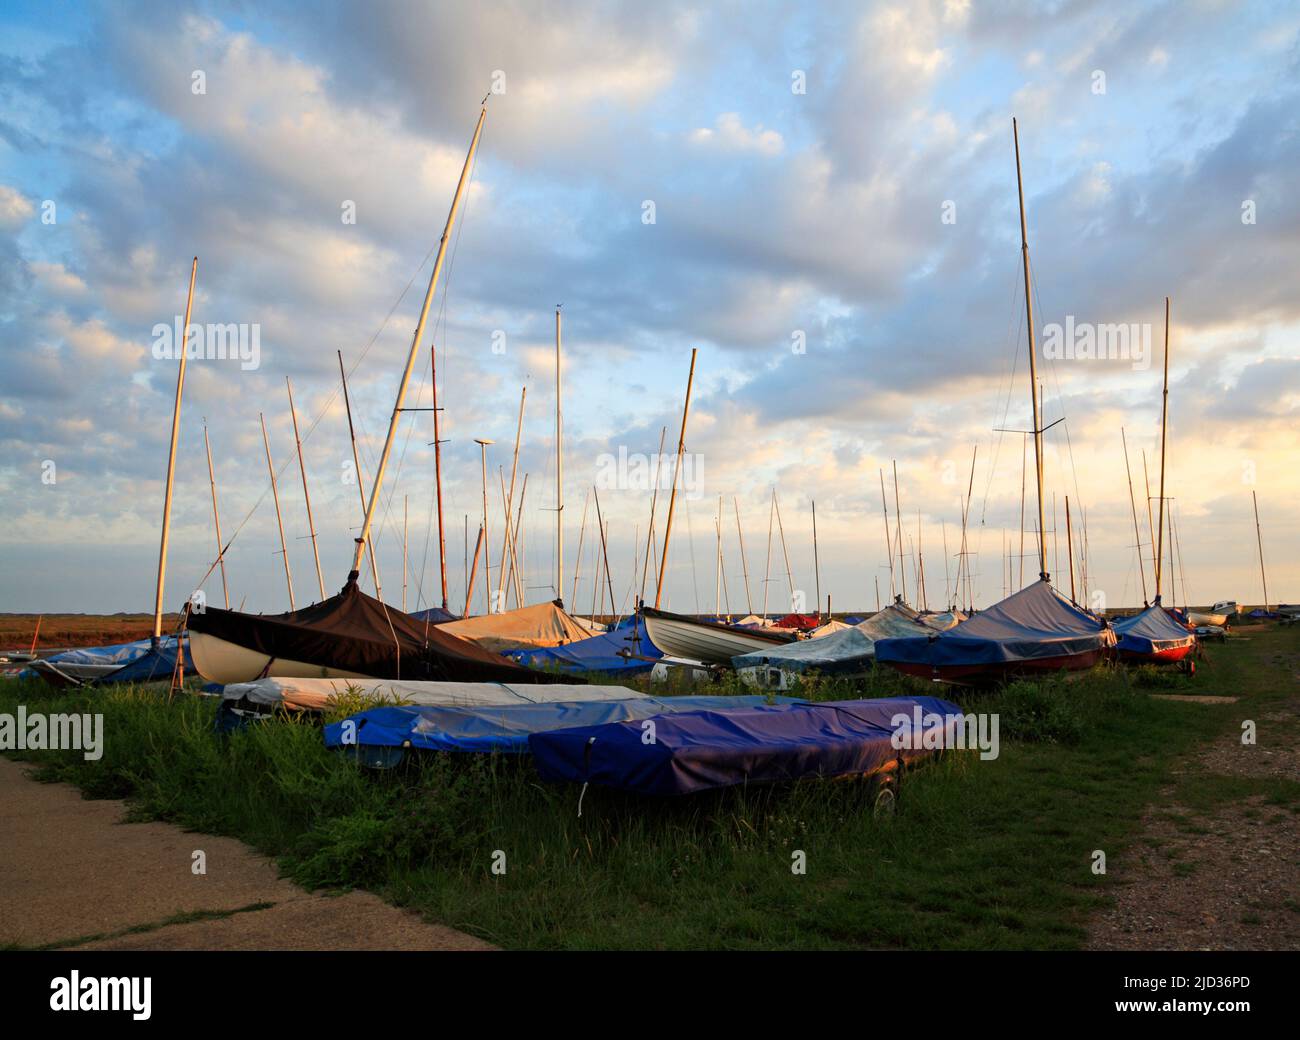 A group of sailboats with trailers parked by the tidal Blakeney Channel on the North Norfolk coast at Blakeney, Norfolk, England, United Kingdom.trave Stock Photo